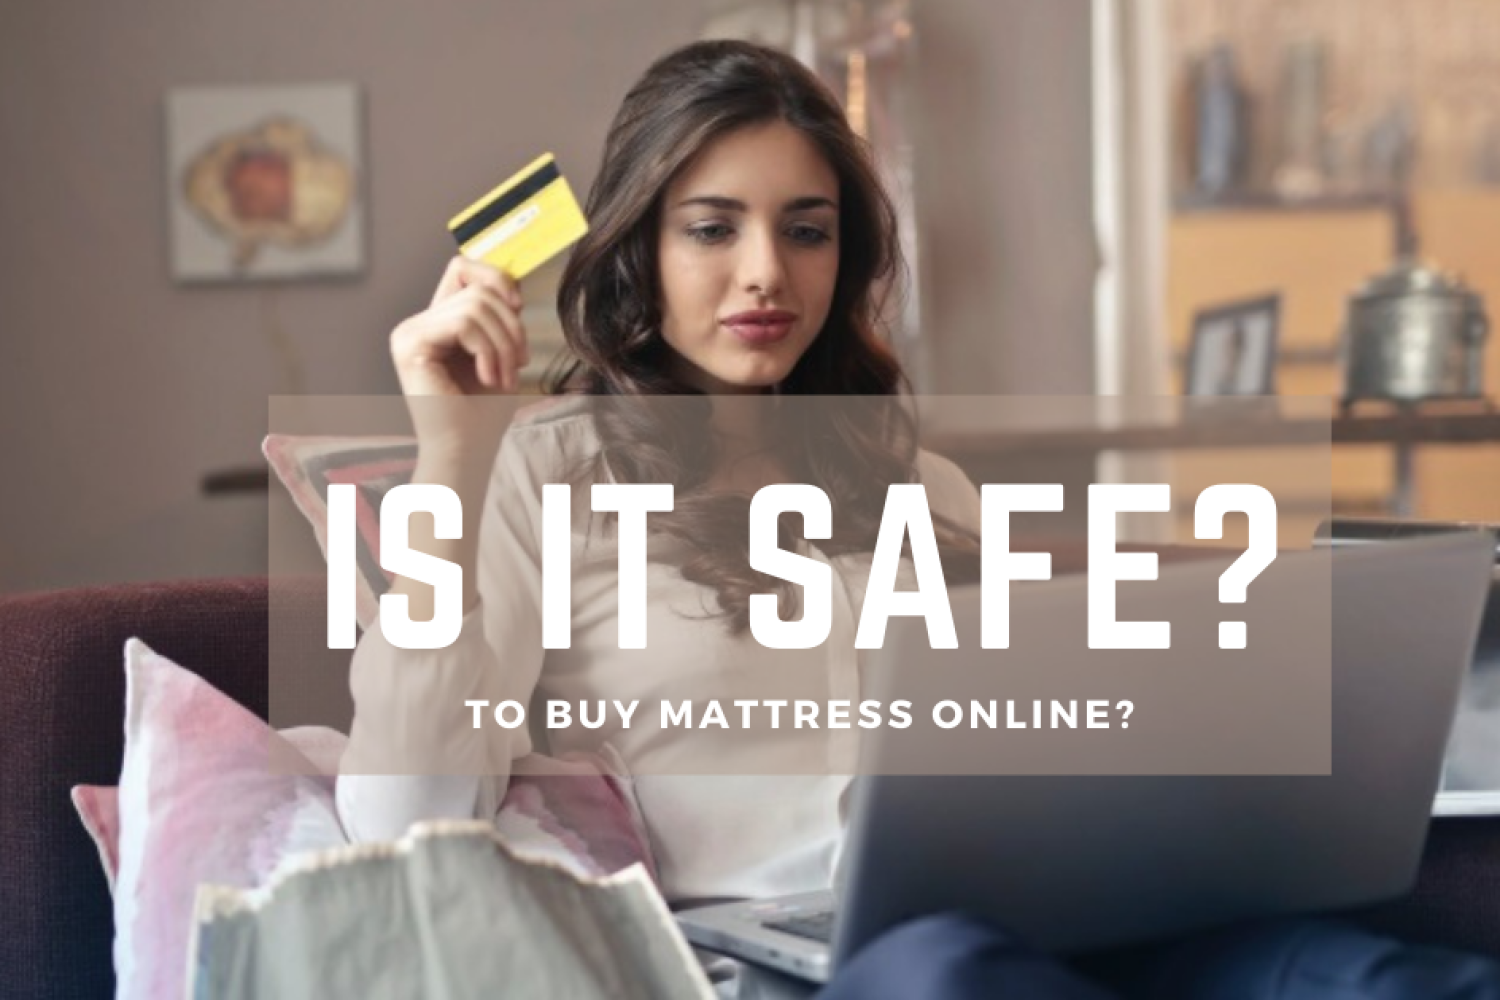 lady holding credit cards and buying mattress online